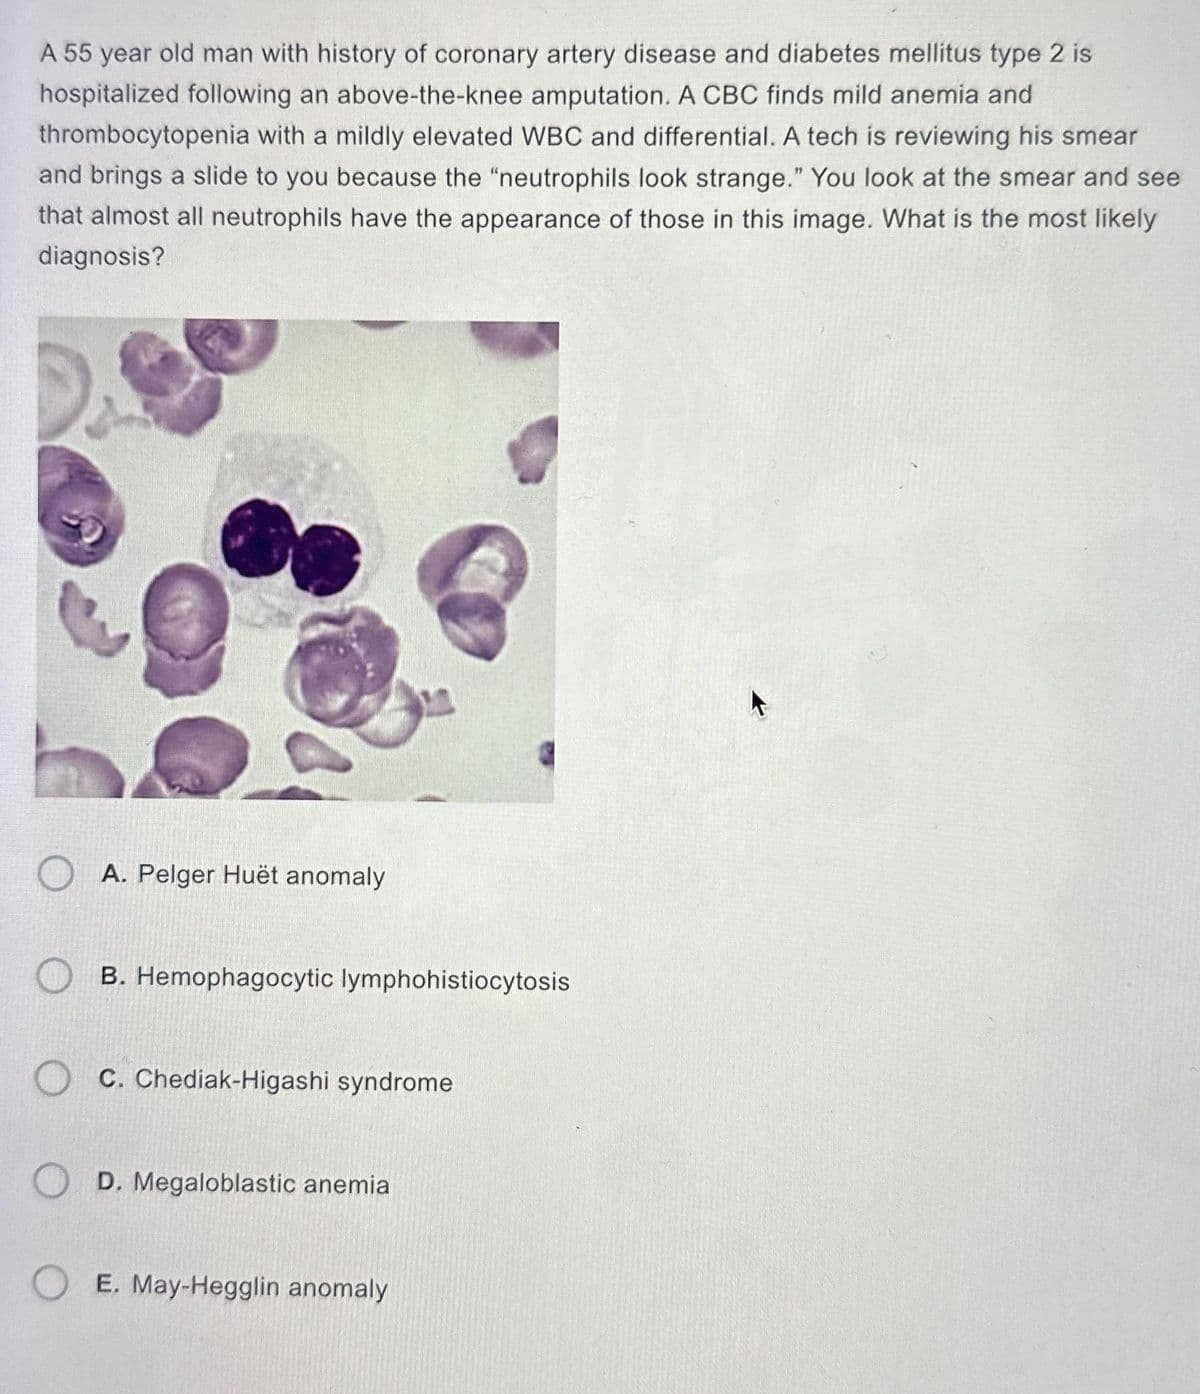 A 55 year old man with history of coronary artery disease and diabetes mellitus type 2 is
hospitalized following an above-the-knee amputation. A CBC finds mild anemia and
thrombocytopenia with a mildly elevated WBC and differential. A tech is reviewing his smear
and brings a slide to you because the "neutrophils look strange." You look at the smear and see
that almost all neutrophils have the appearance of those in this image. What is the most likely
diagnosis?
A. Pelger Huët anomaly
B. Hemophagocytic lymphohistiocytosis
C. Chediak-Higashi syndrome
OD. Megaloblastic anemia
OE. May-Hegglin anomaly